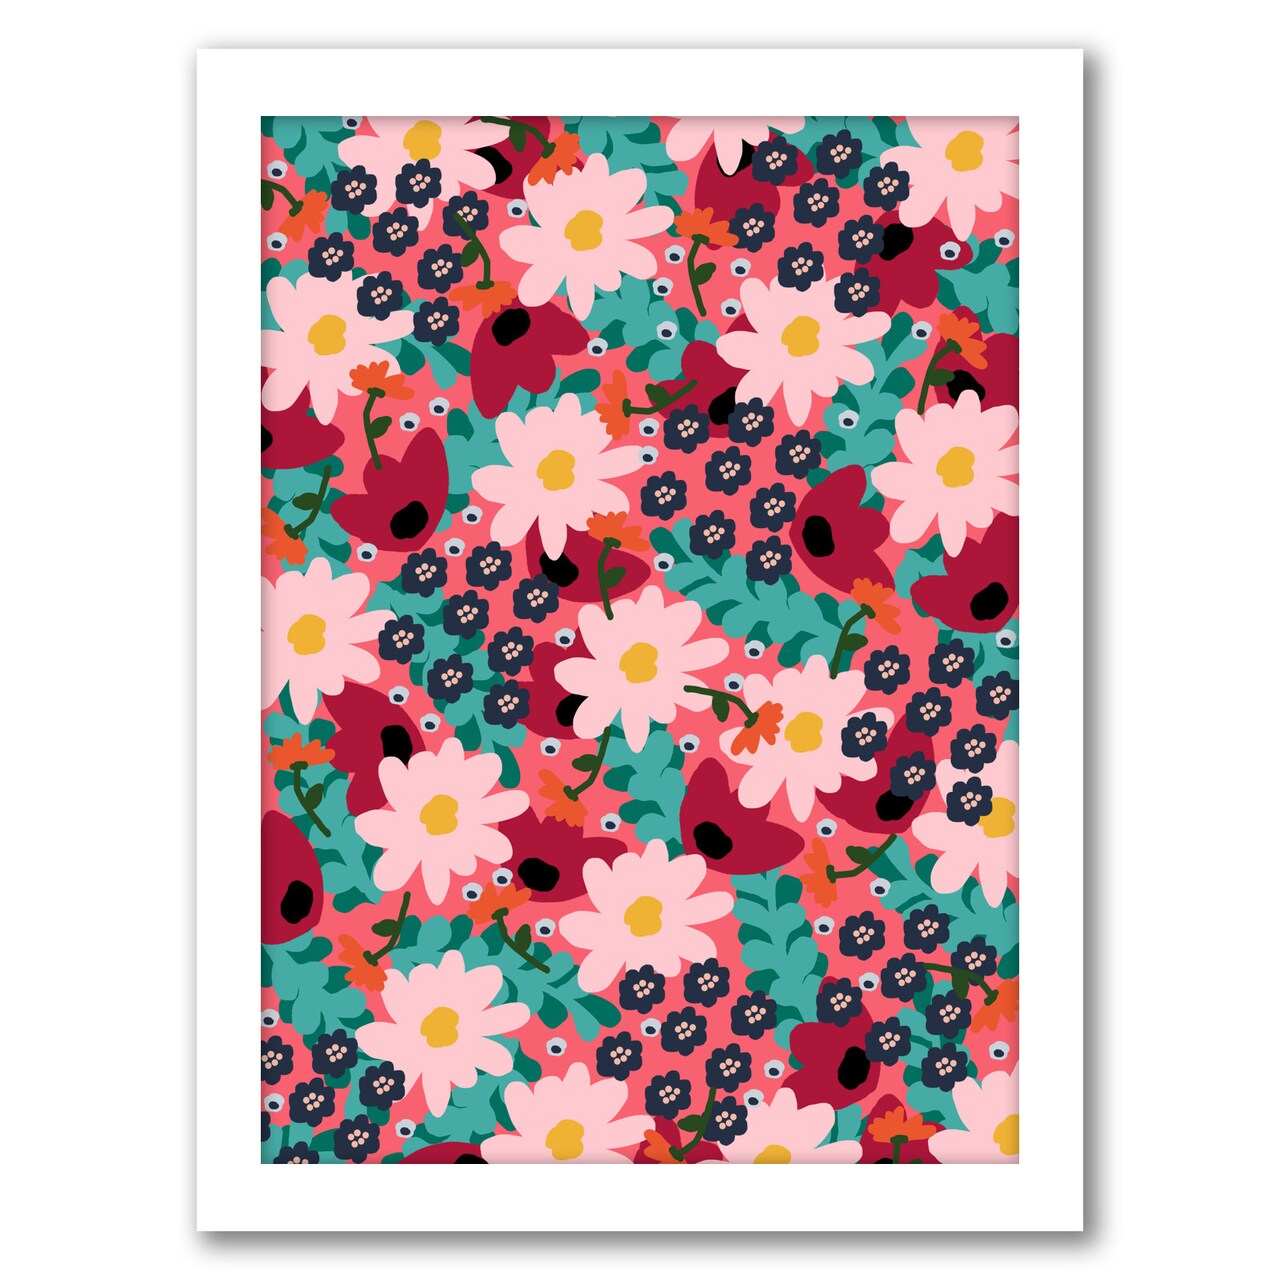 Rainy Day Flowers by Studio Grand-Pere Frame  - Americanflat